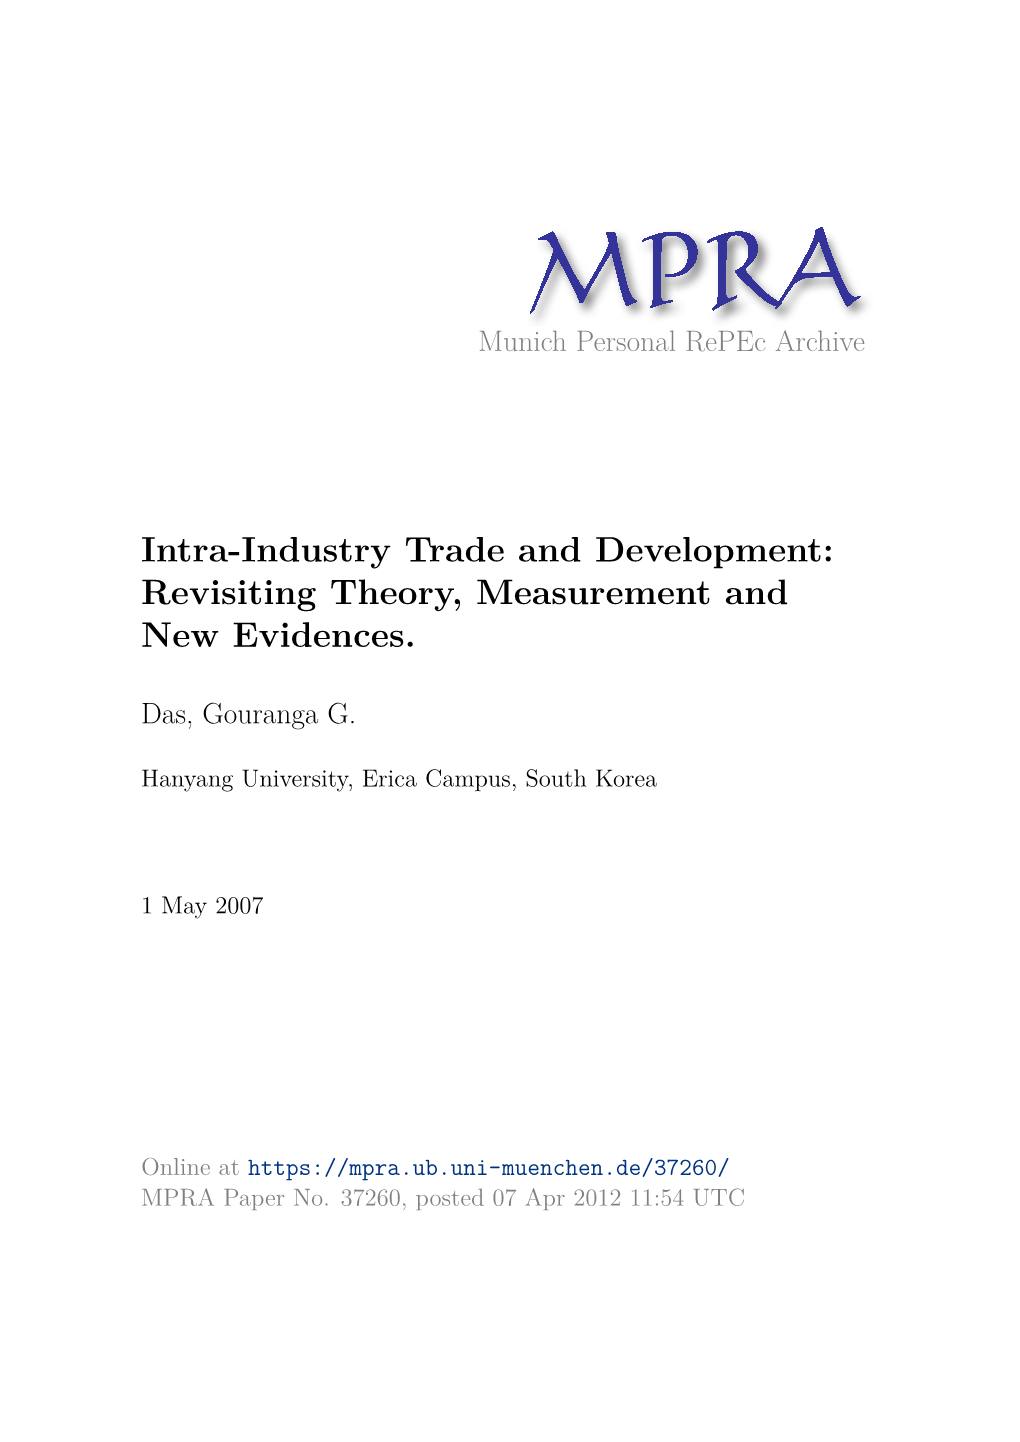 Revisiting Old Issues on Intra-Industry Trade for Development: Theory, Measurement and New Evidences